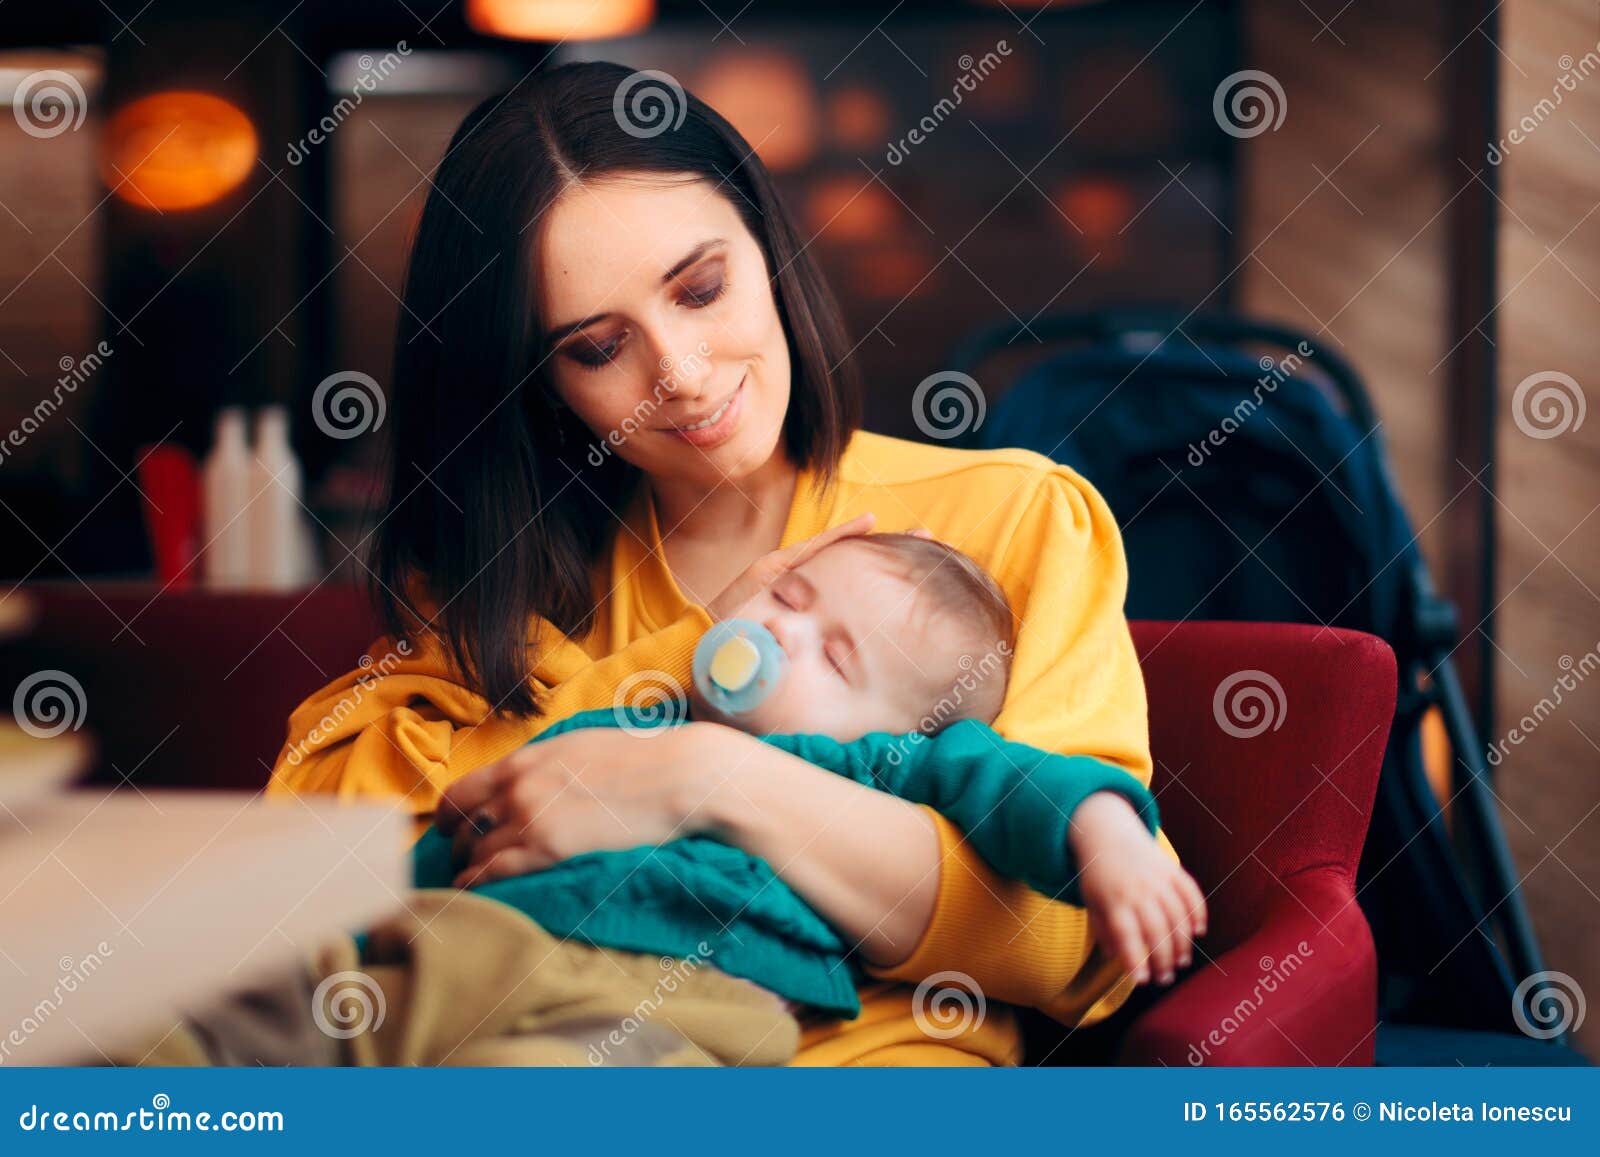 Mother Holding Baby Boy In Her Arms Royalty Free Stock 